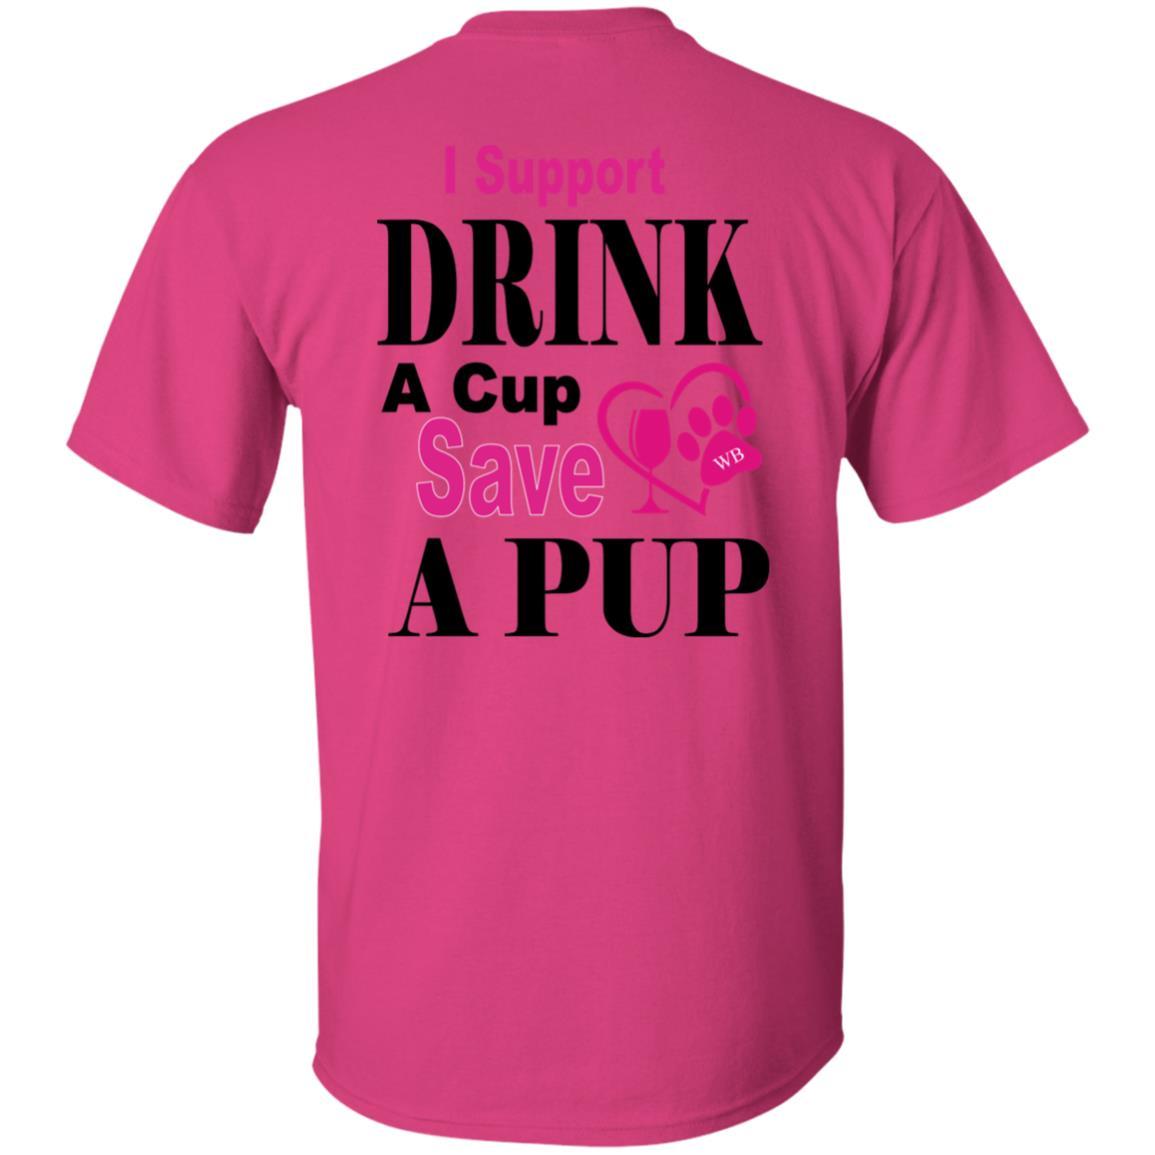 T-Shirts WB " I Support Drink A Cup Save A Pup" Ultra Cotton T-Shirt Double graphics WineyBitchesCo